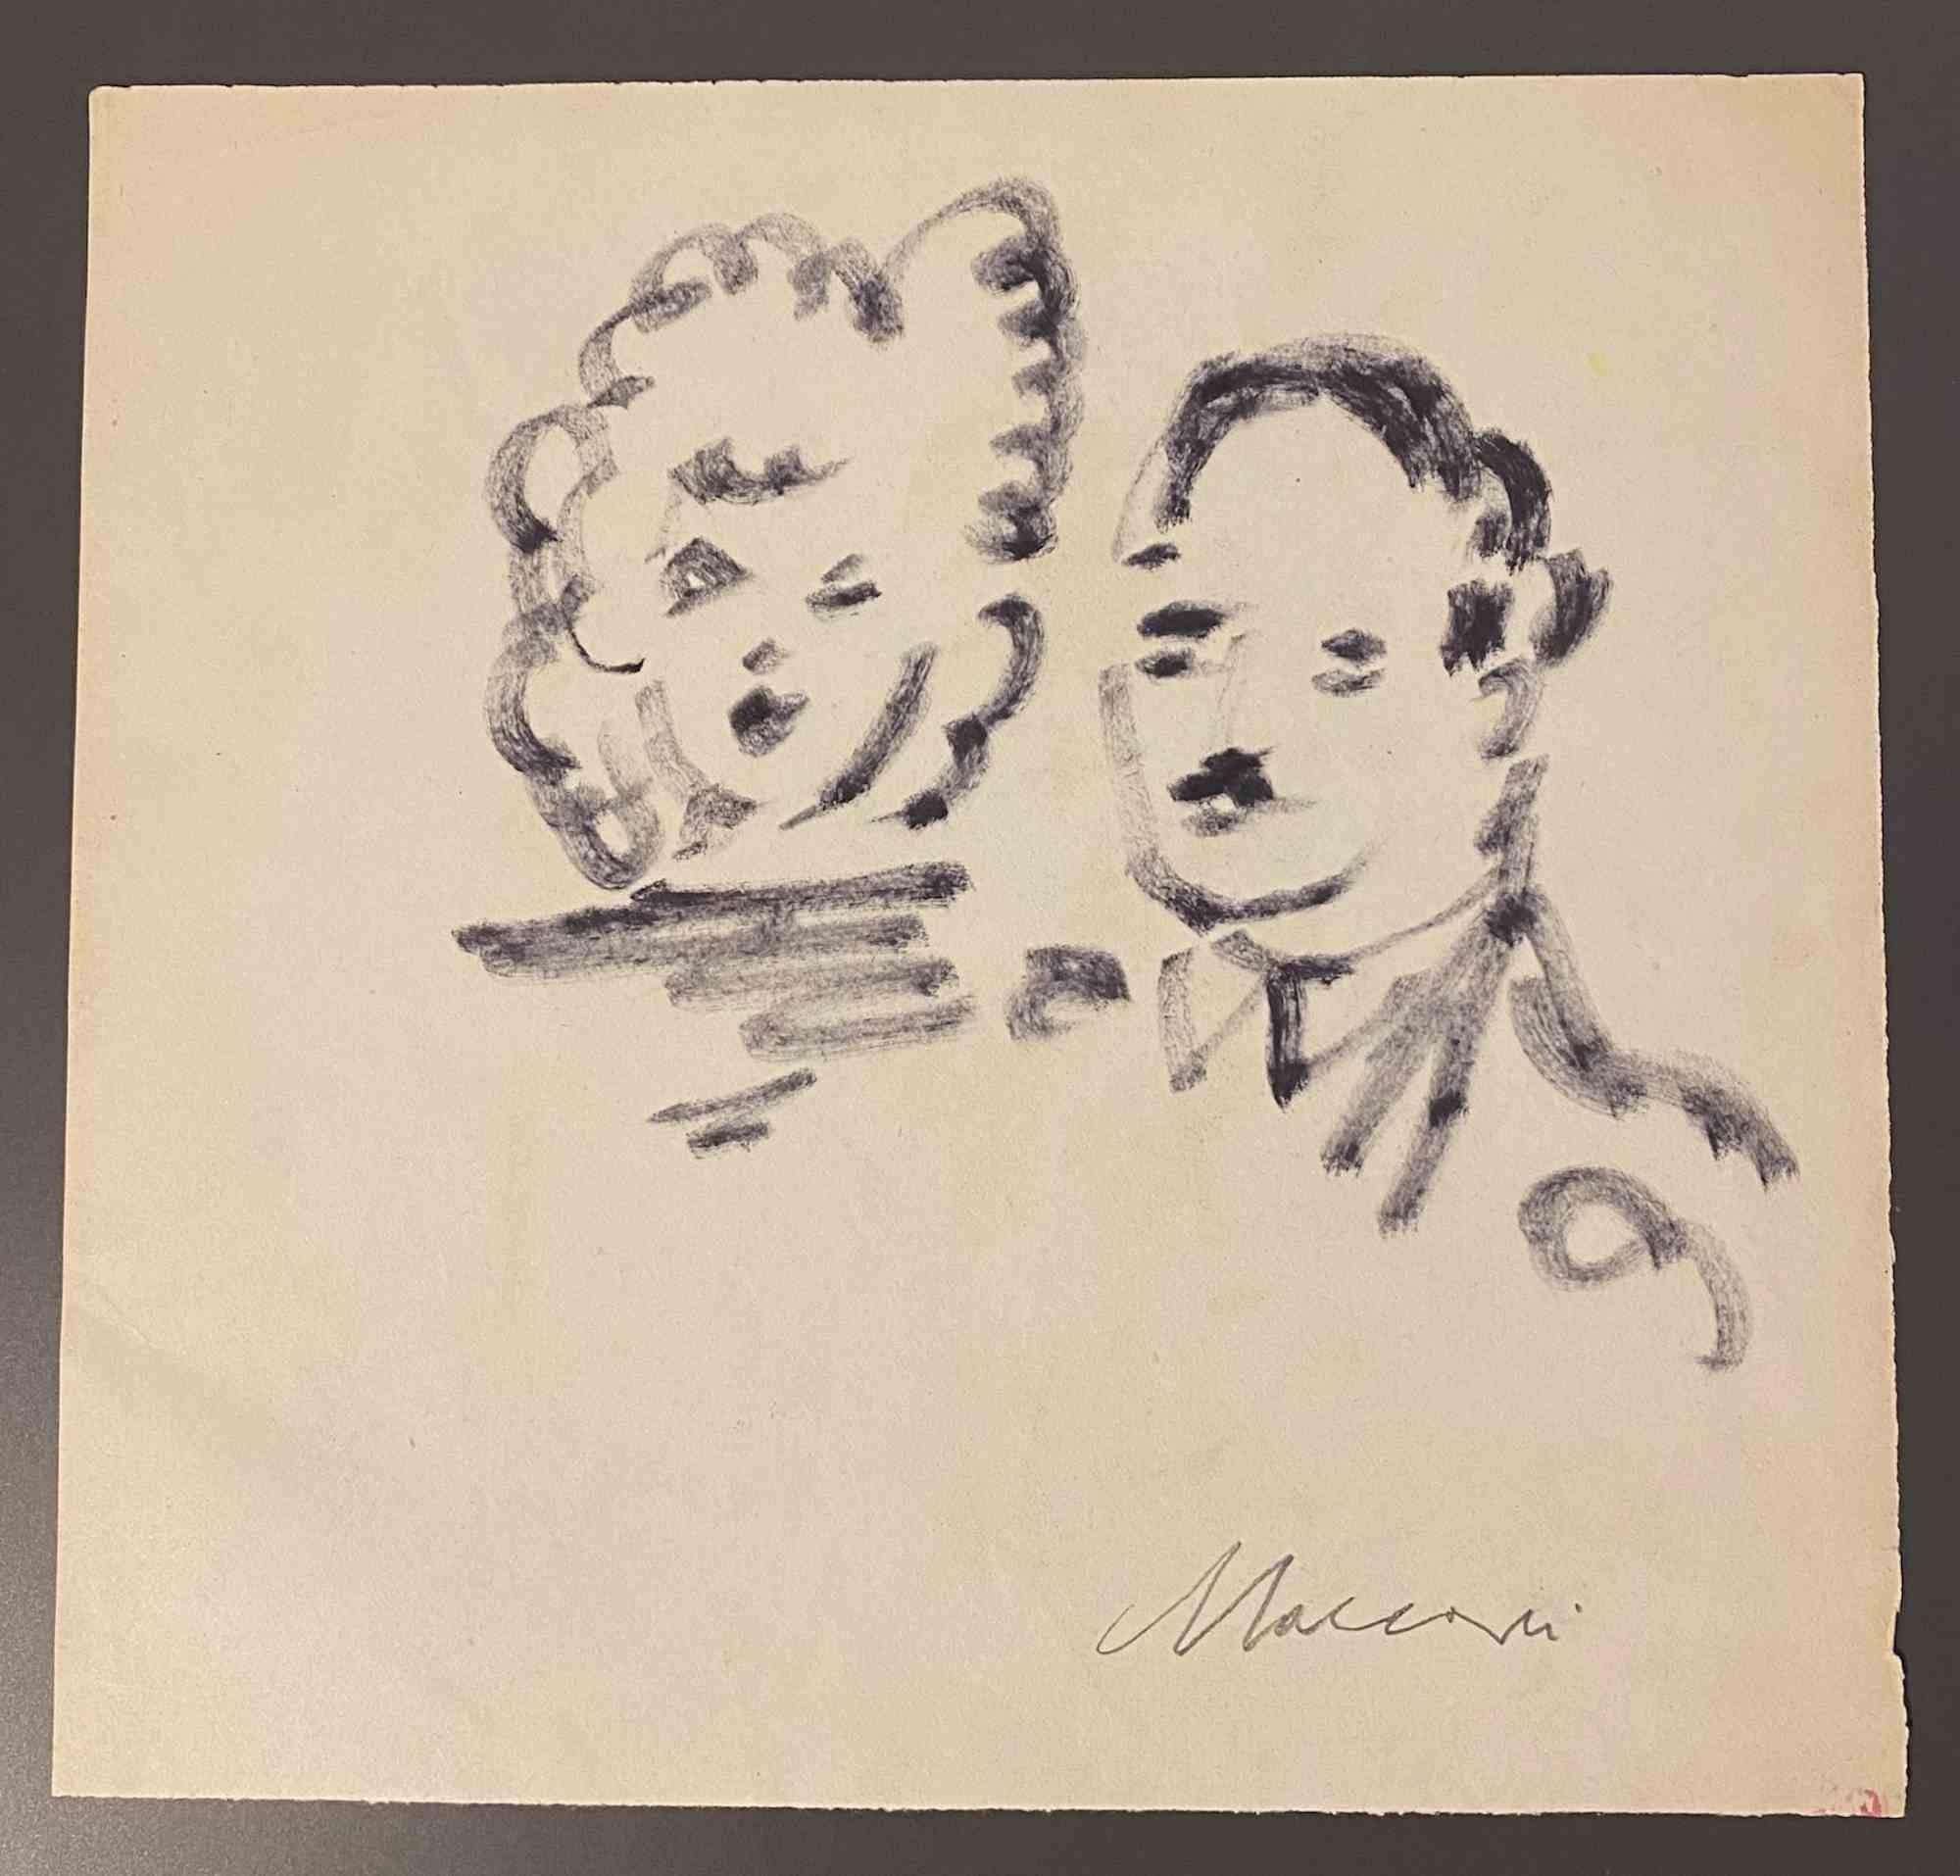 The Couple is a Watercolor Drawing realized by Mino Maccari  (1924-1989) in the Mid-20th Century.

Hand-signed on the lower.

Good conditions.

Mino Maccari (Siena, 1924-Rome, June 16, 1989) was an Italian writer, painter, engraver and journalist,